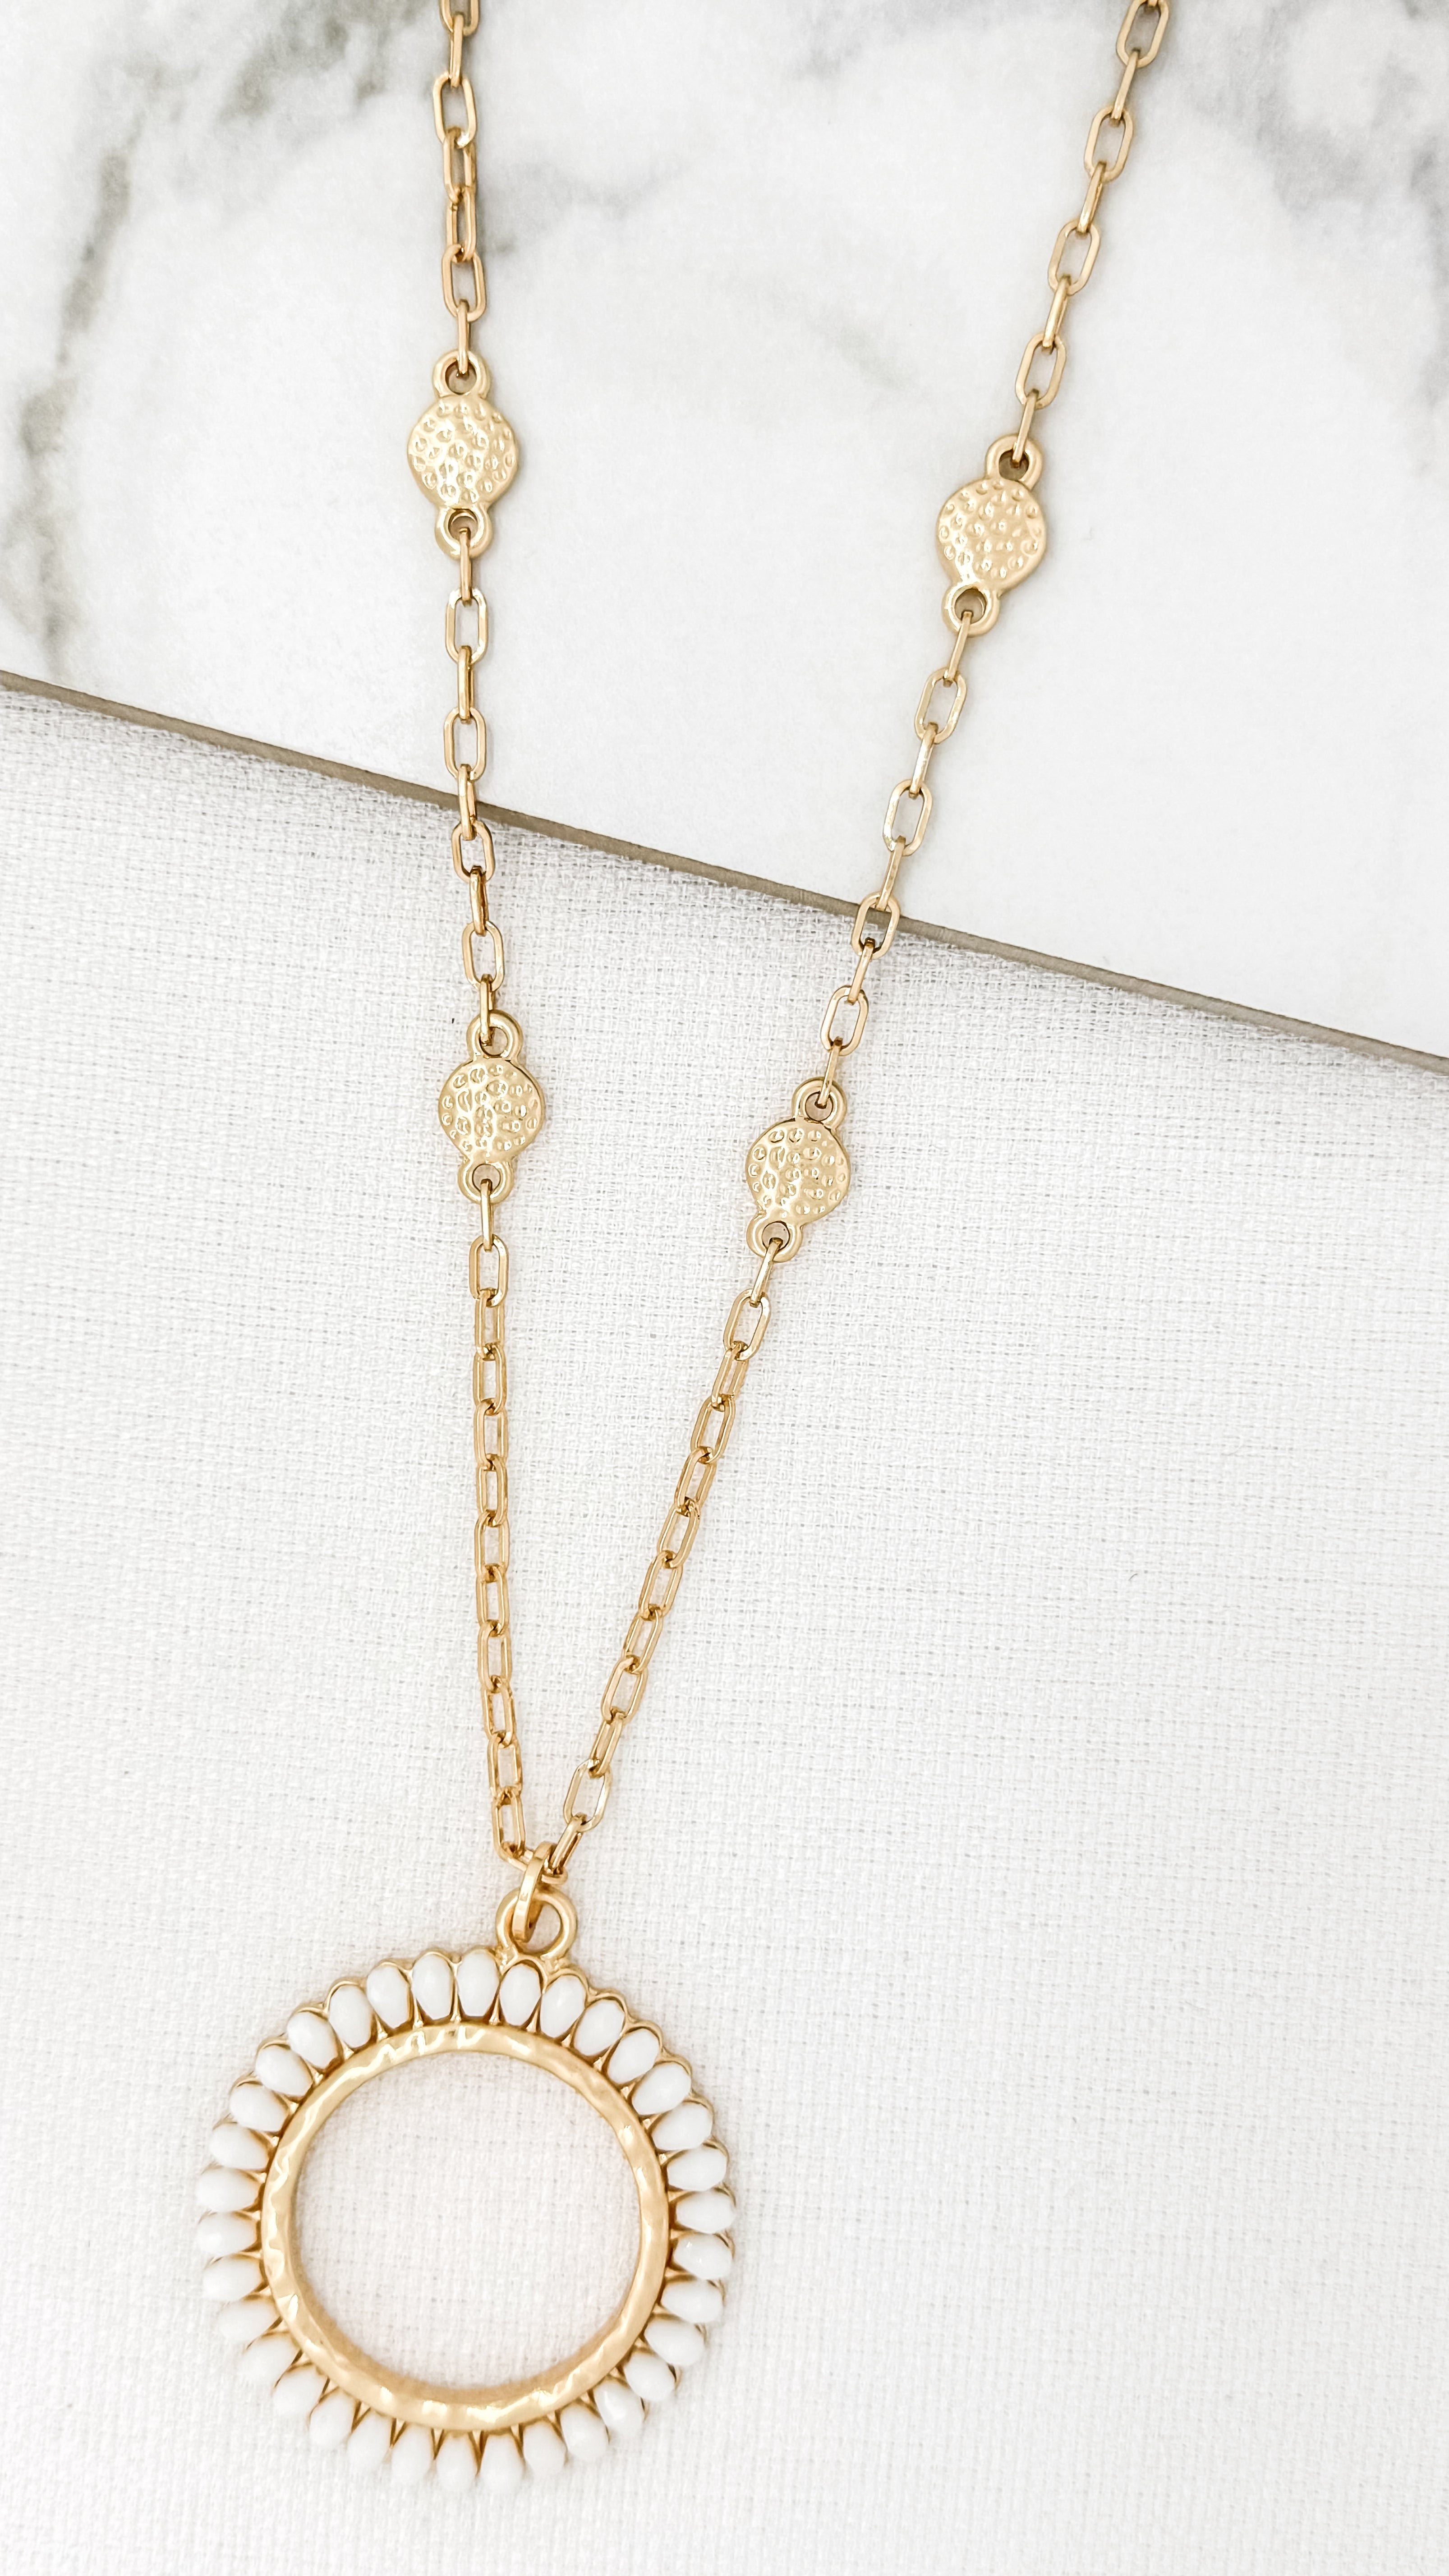 Beaded Circle Necklace in Gold